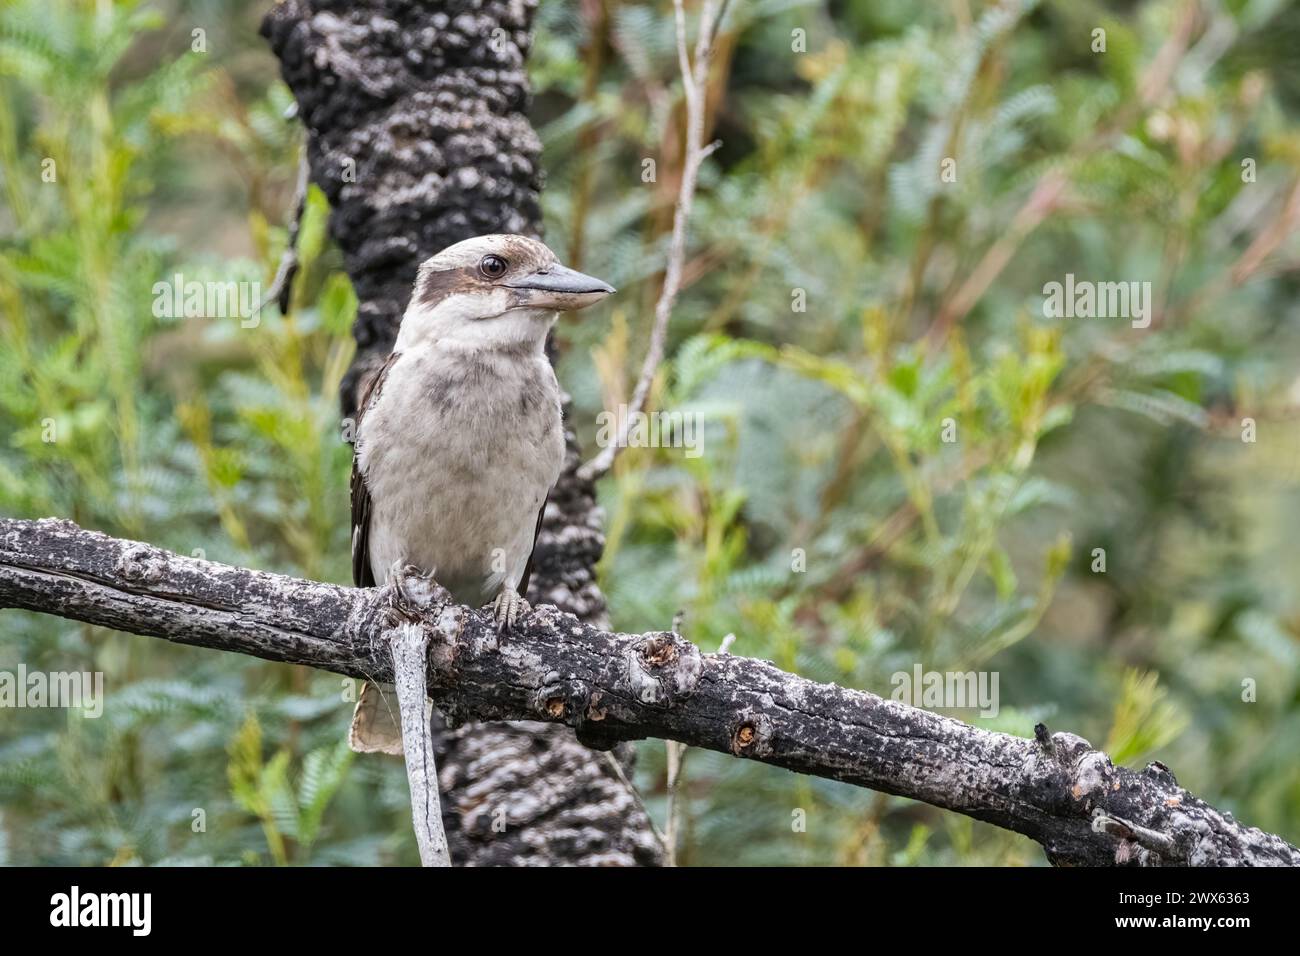 laughing kookaburra, Dacelo novaeguineae, perched on a tree branch, Banksia Bluff Campground, Australia Stock Photo